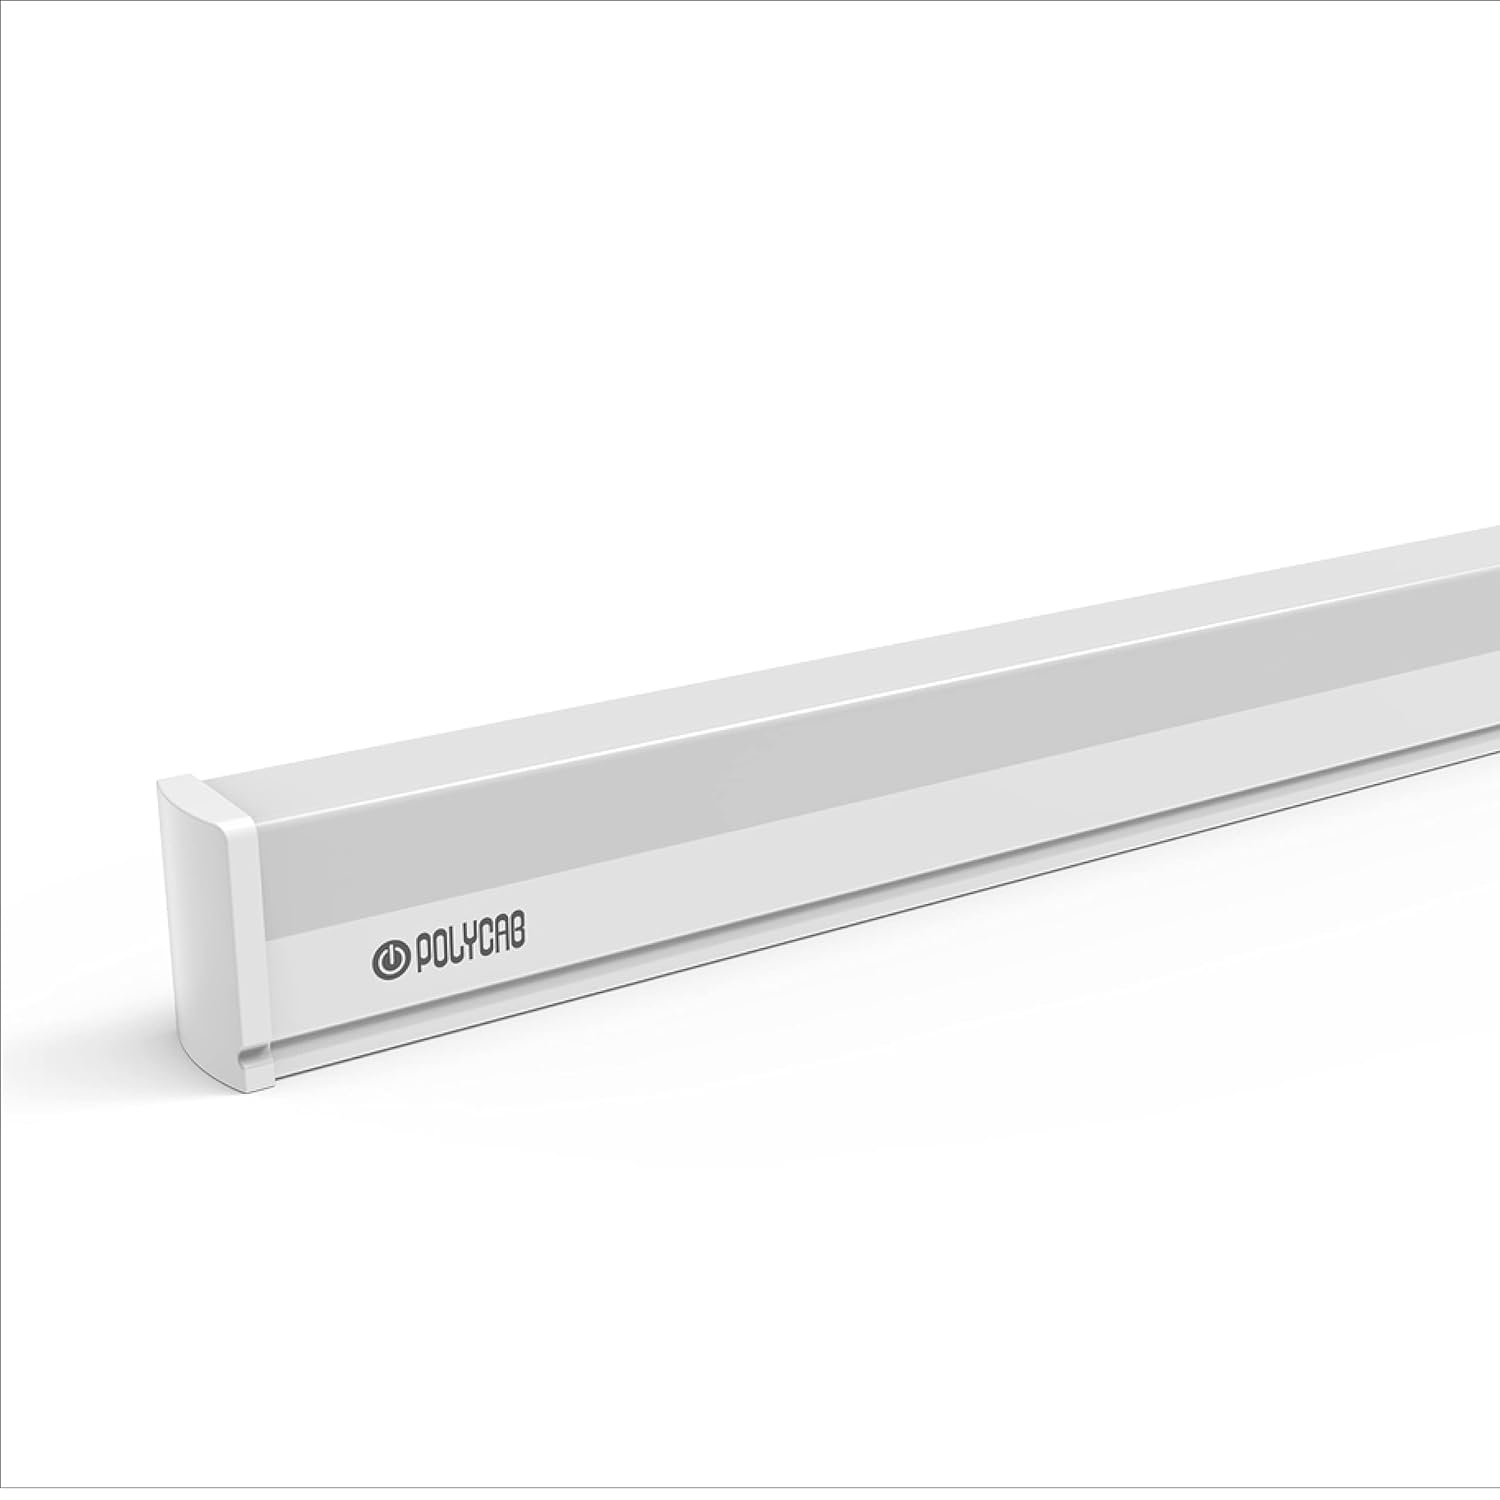 Polycab 20W Intenso  LXS LED Batten in Square Shape, Energy-efficient Light with Cool White 4 feet